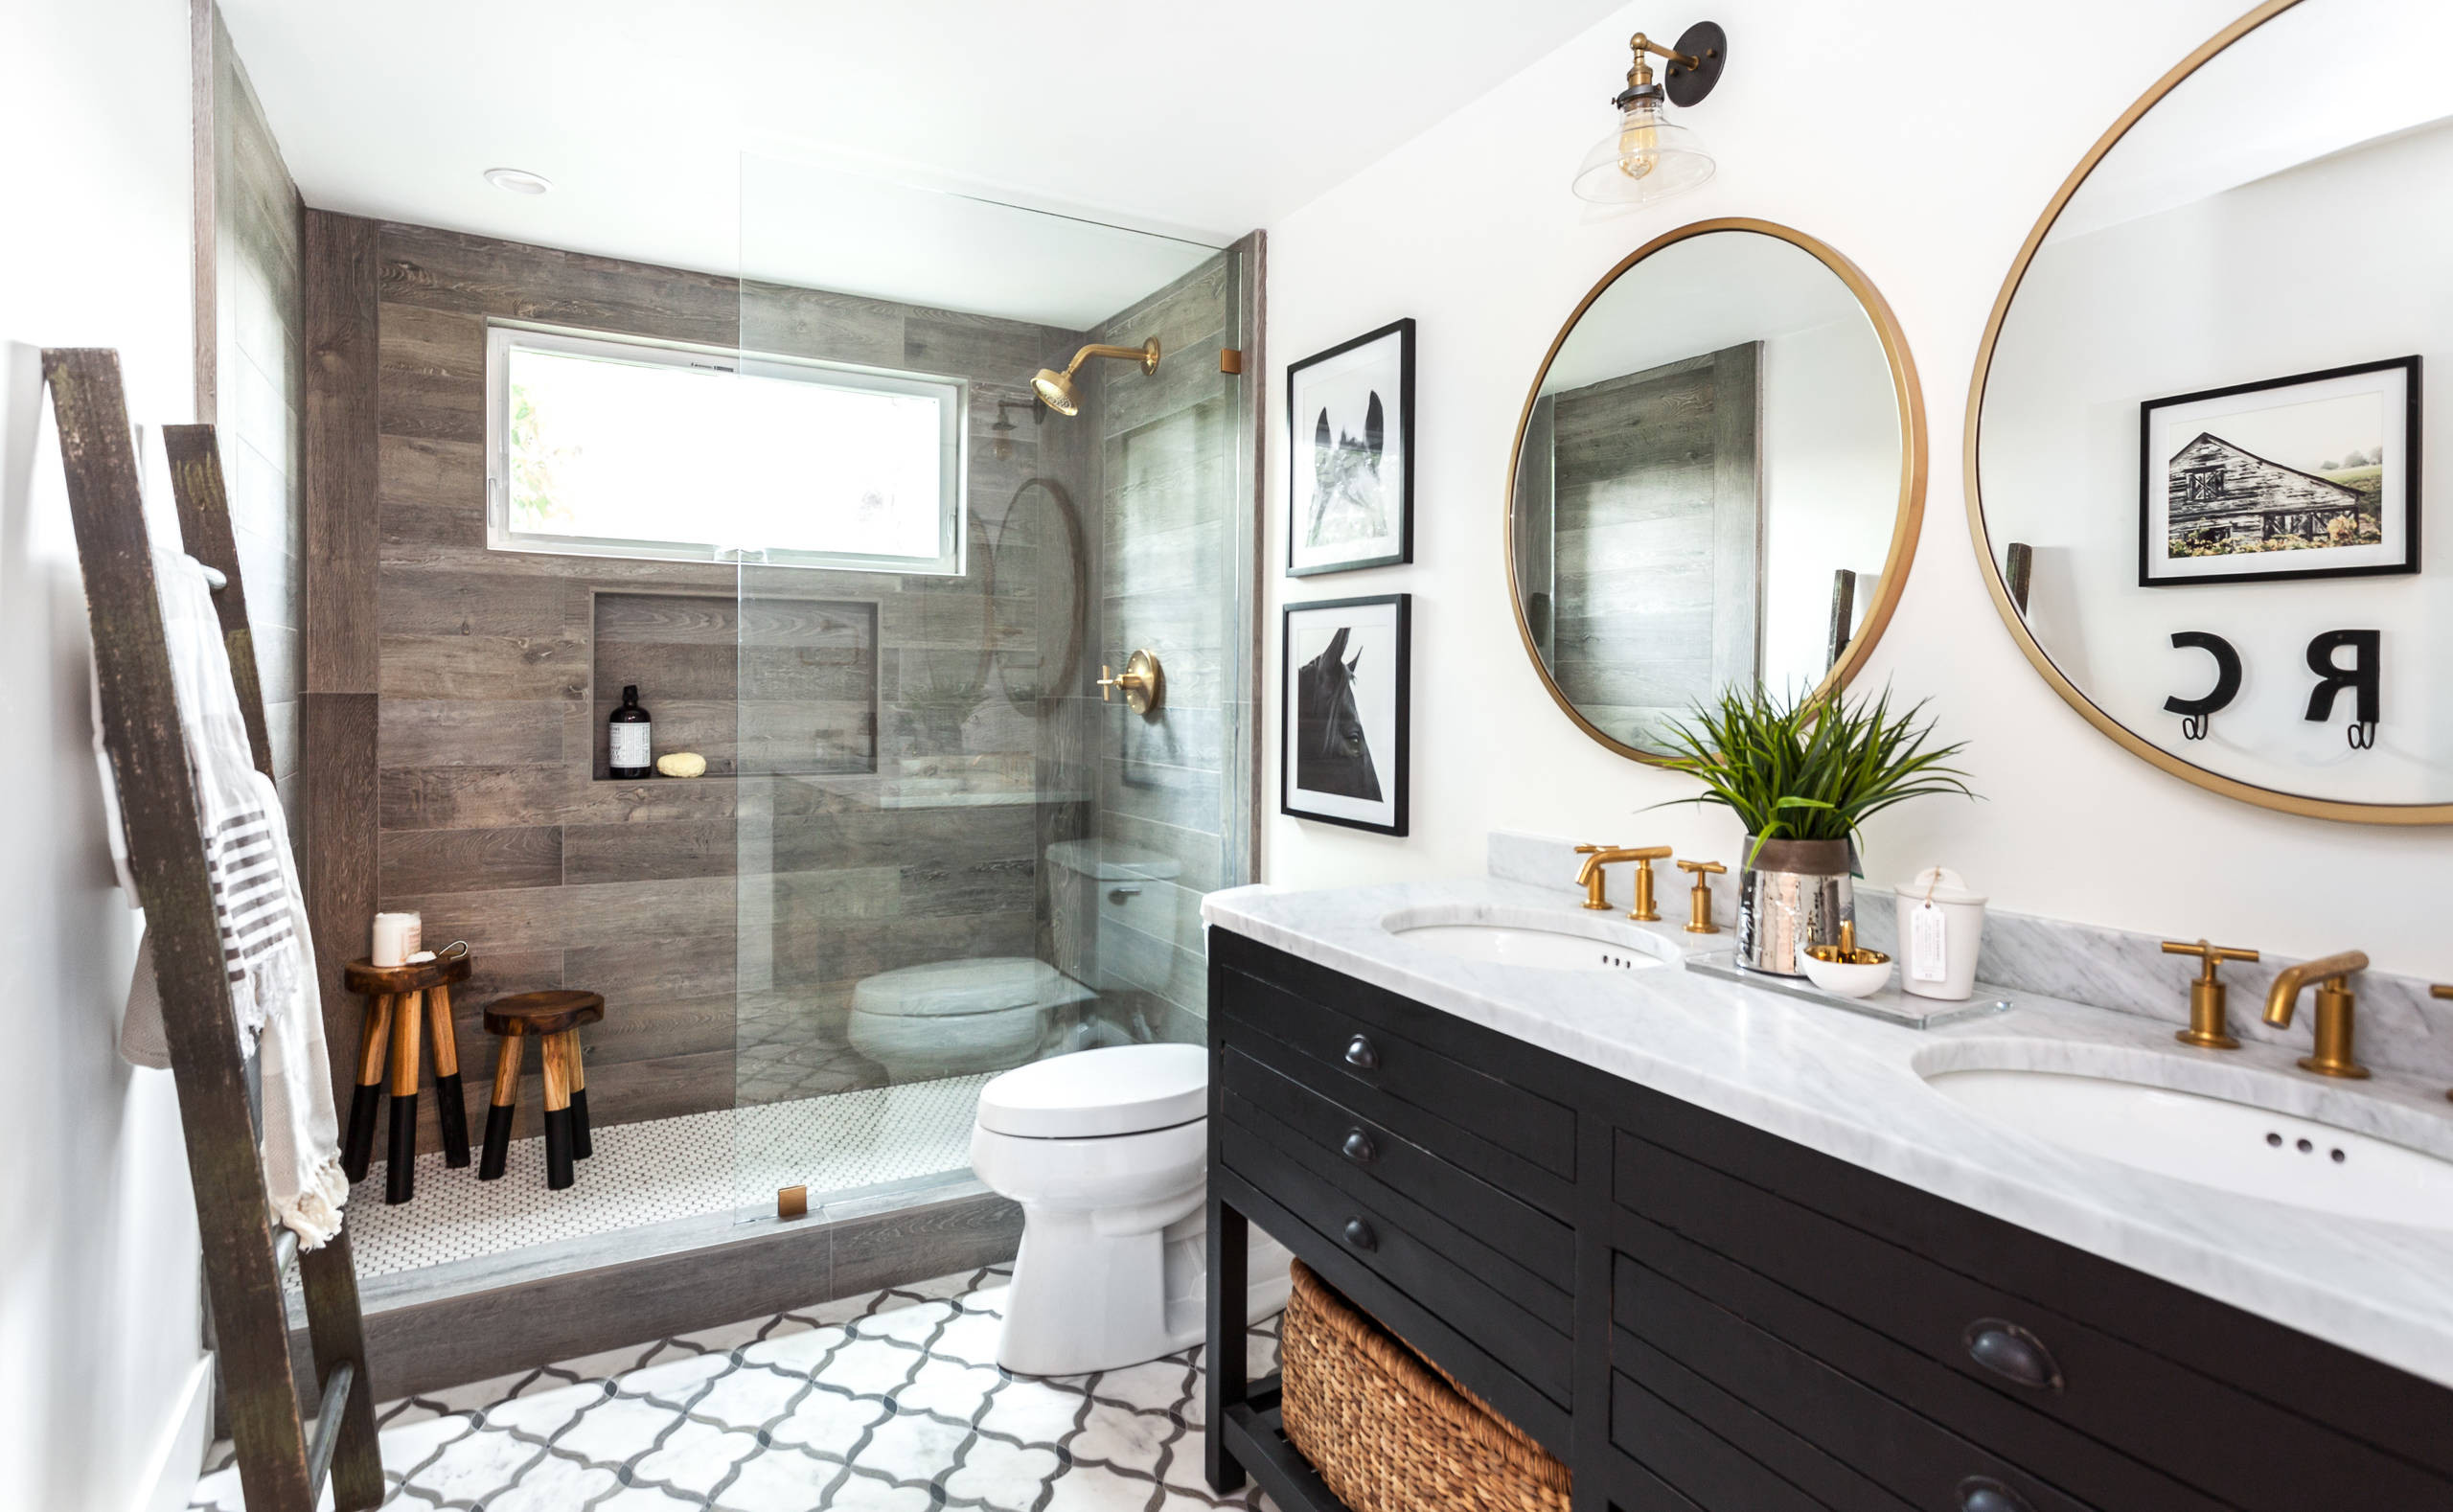 Master Bathroom Ideas 2020
 2020 Tips and Tricks for Your Best Bathroom Remodel Yet